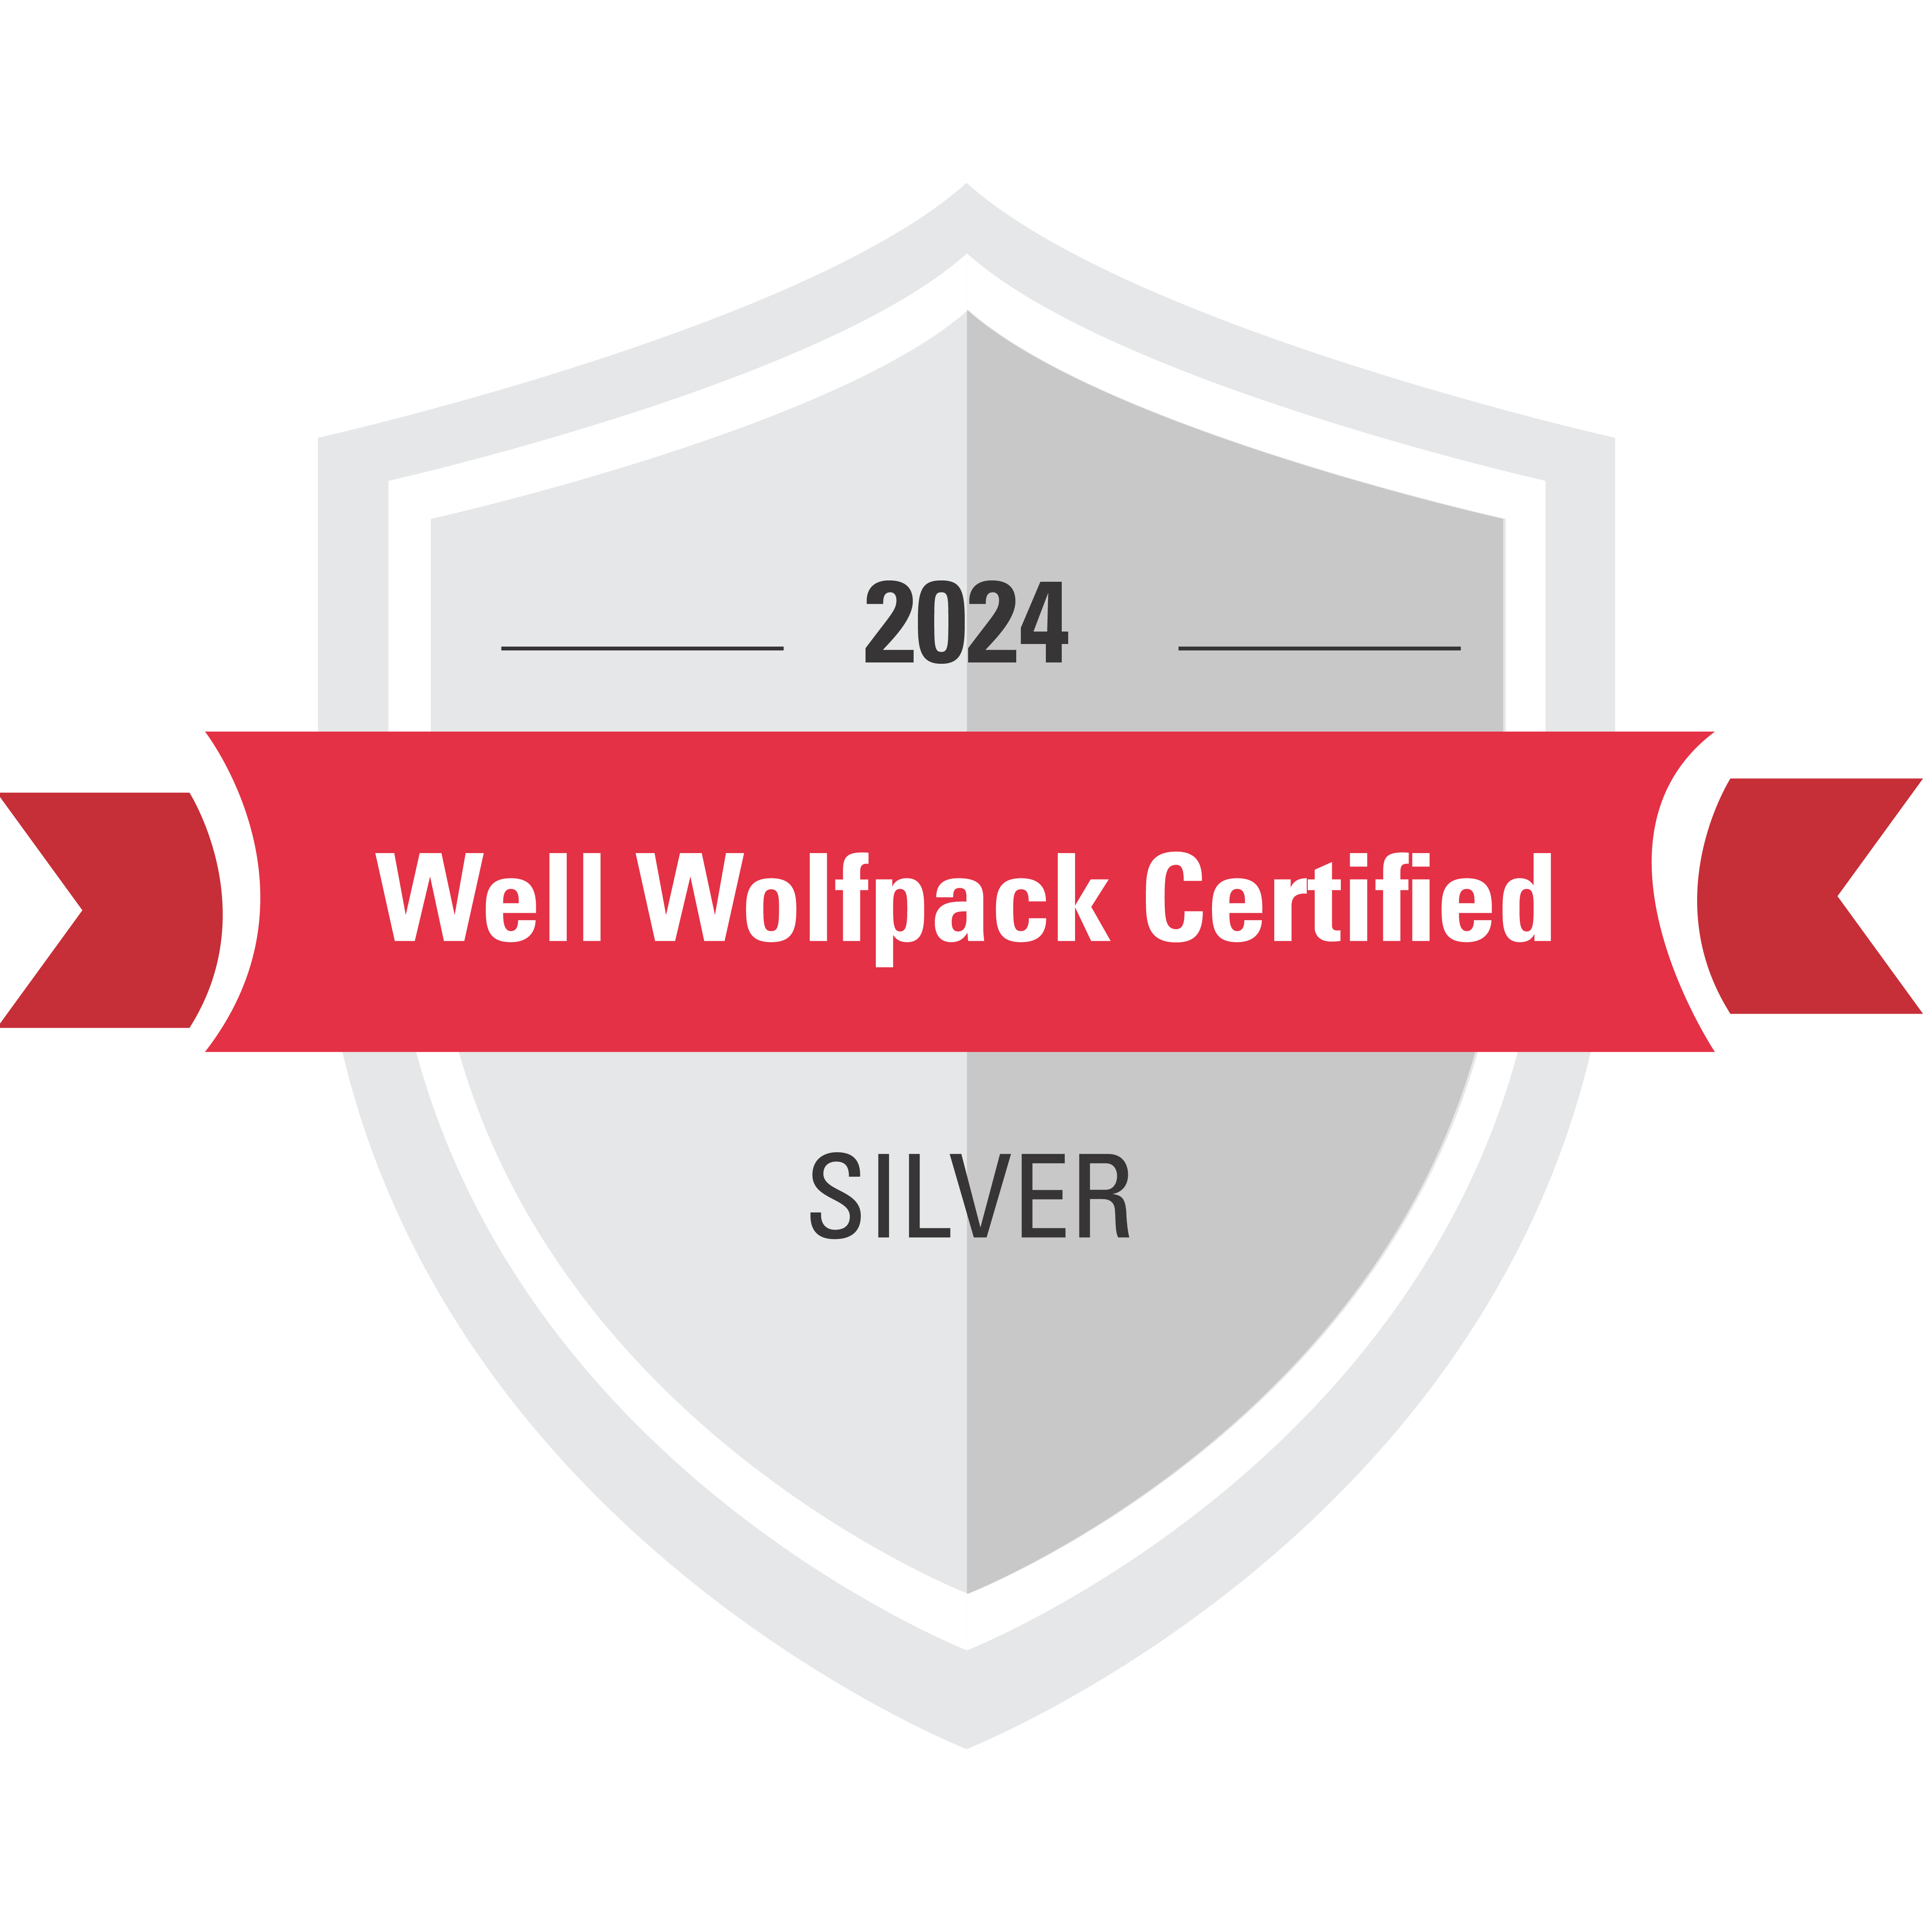 Well Wolfpack Certified Silver